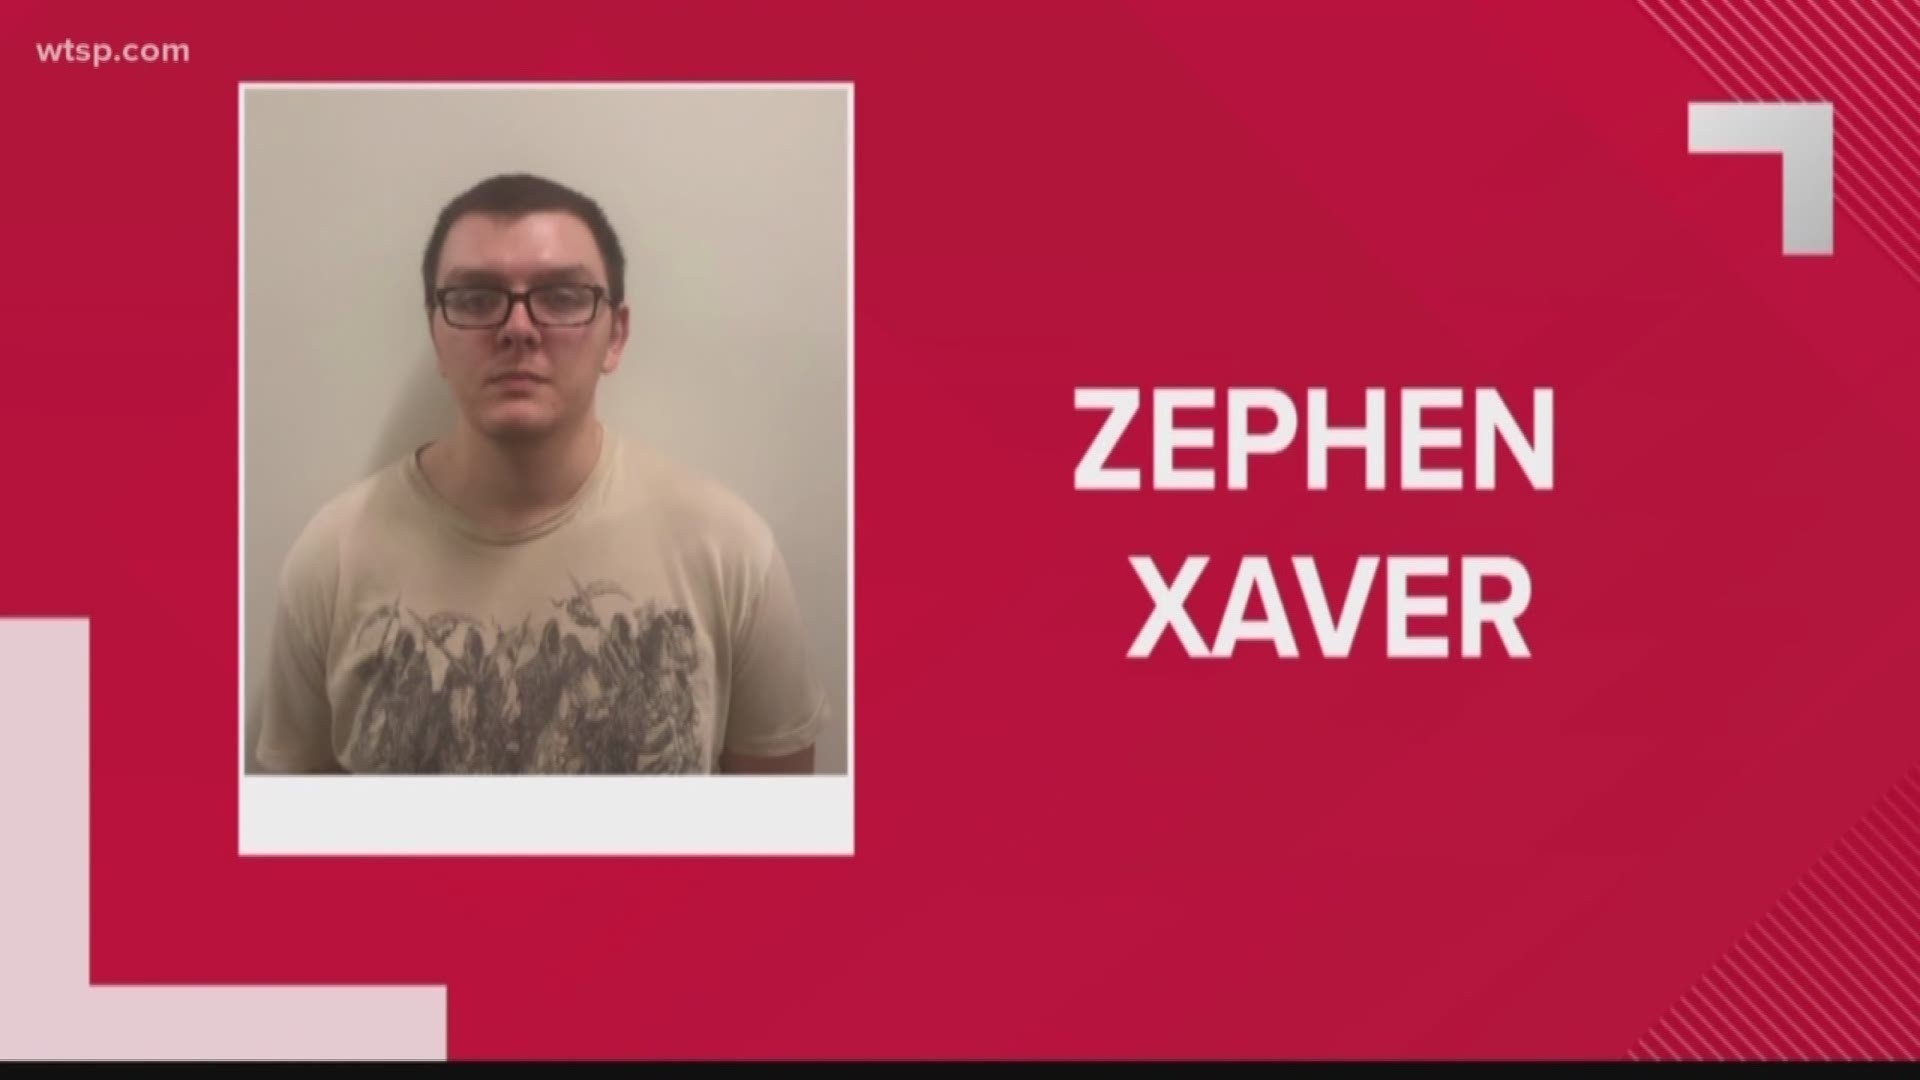 A neighbor described Zephen Xaver as intelligent and seemingly normal.